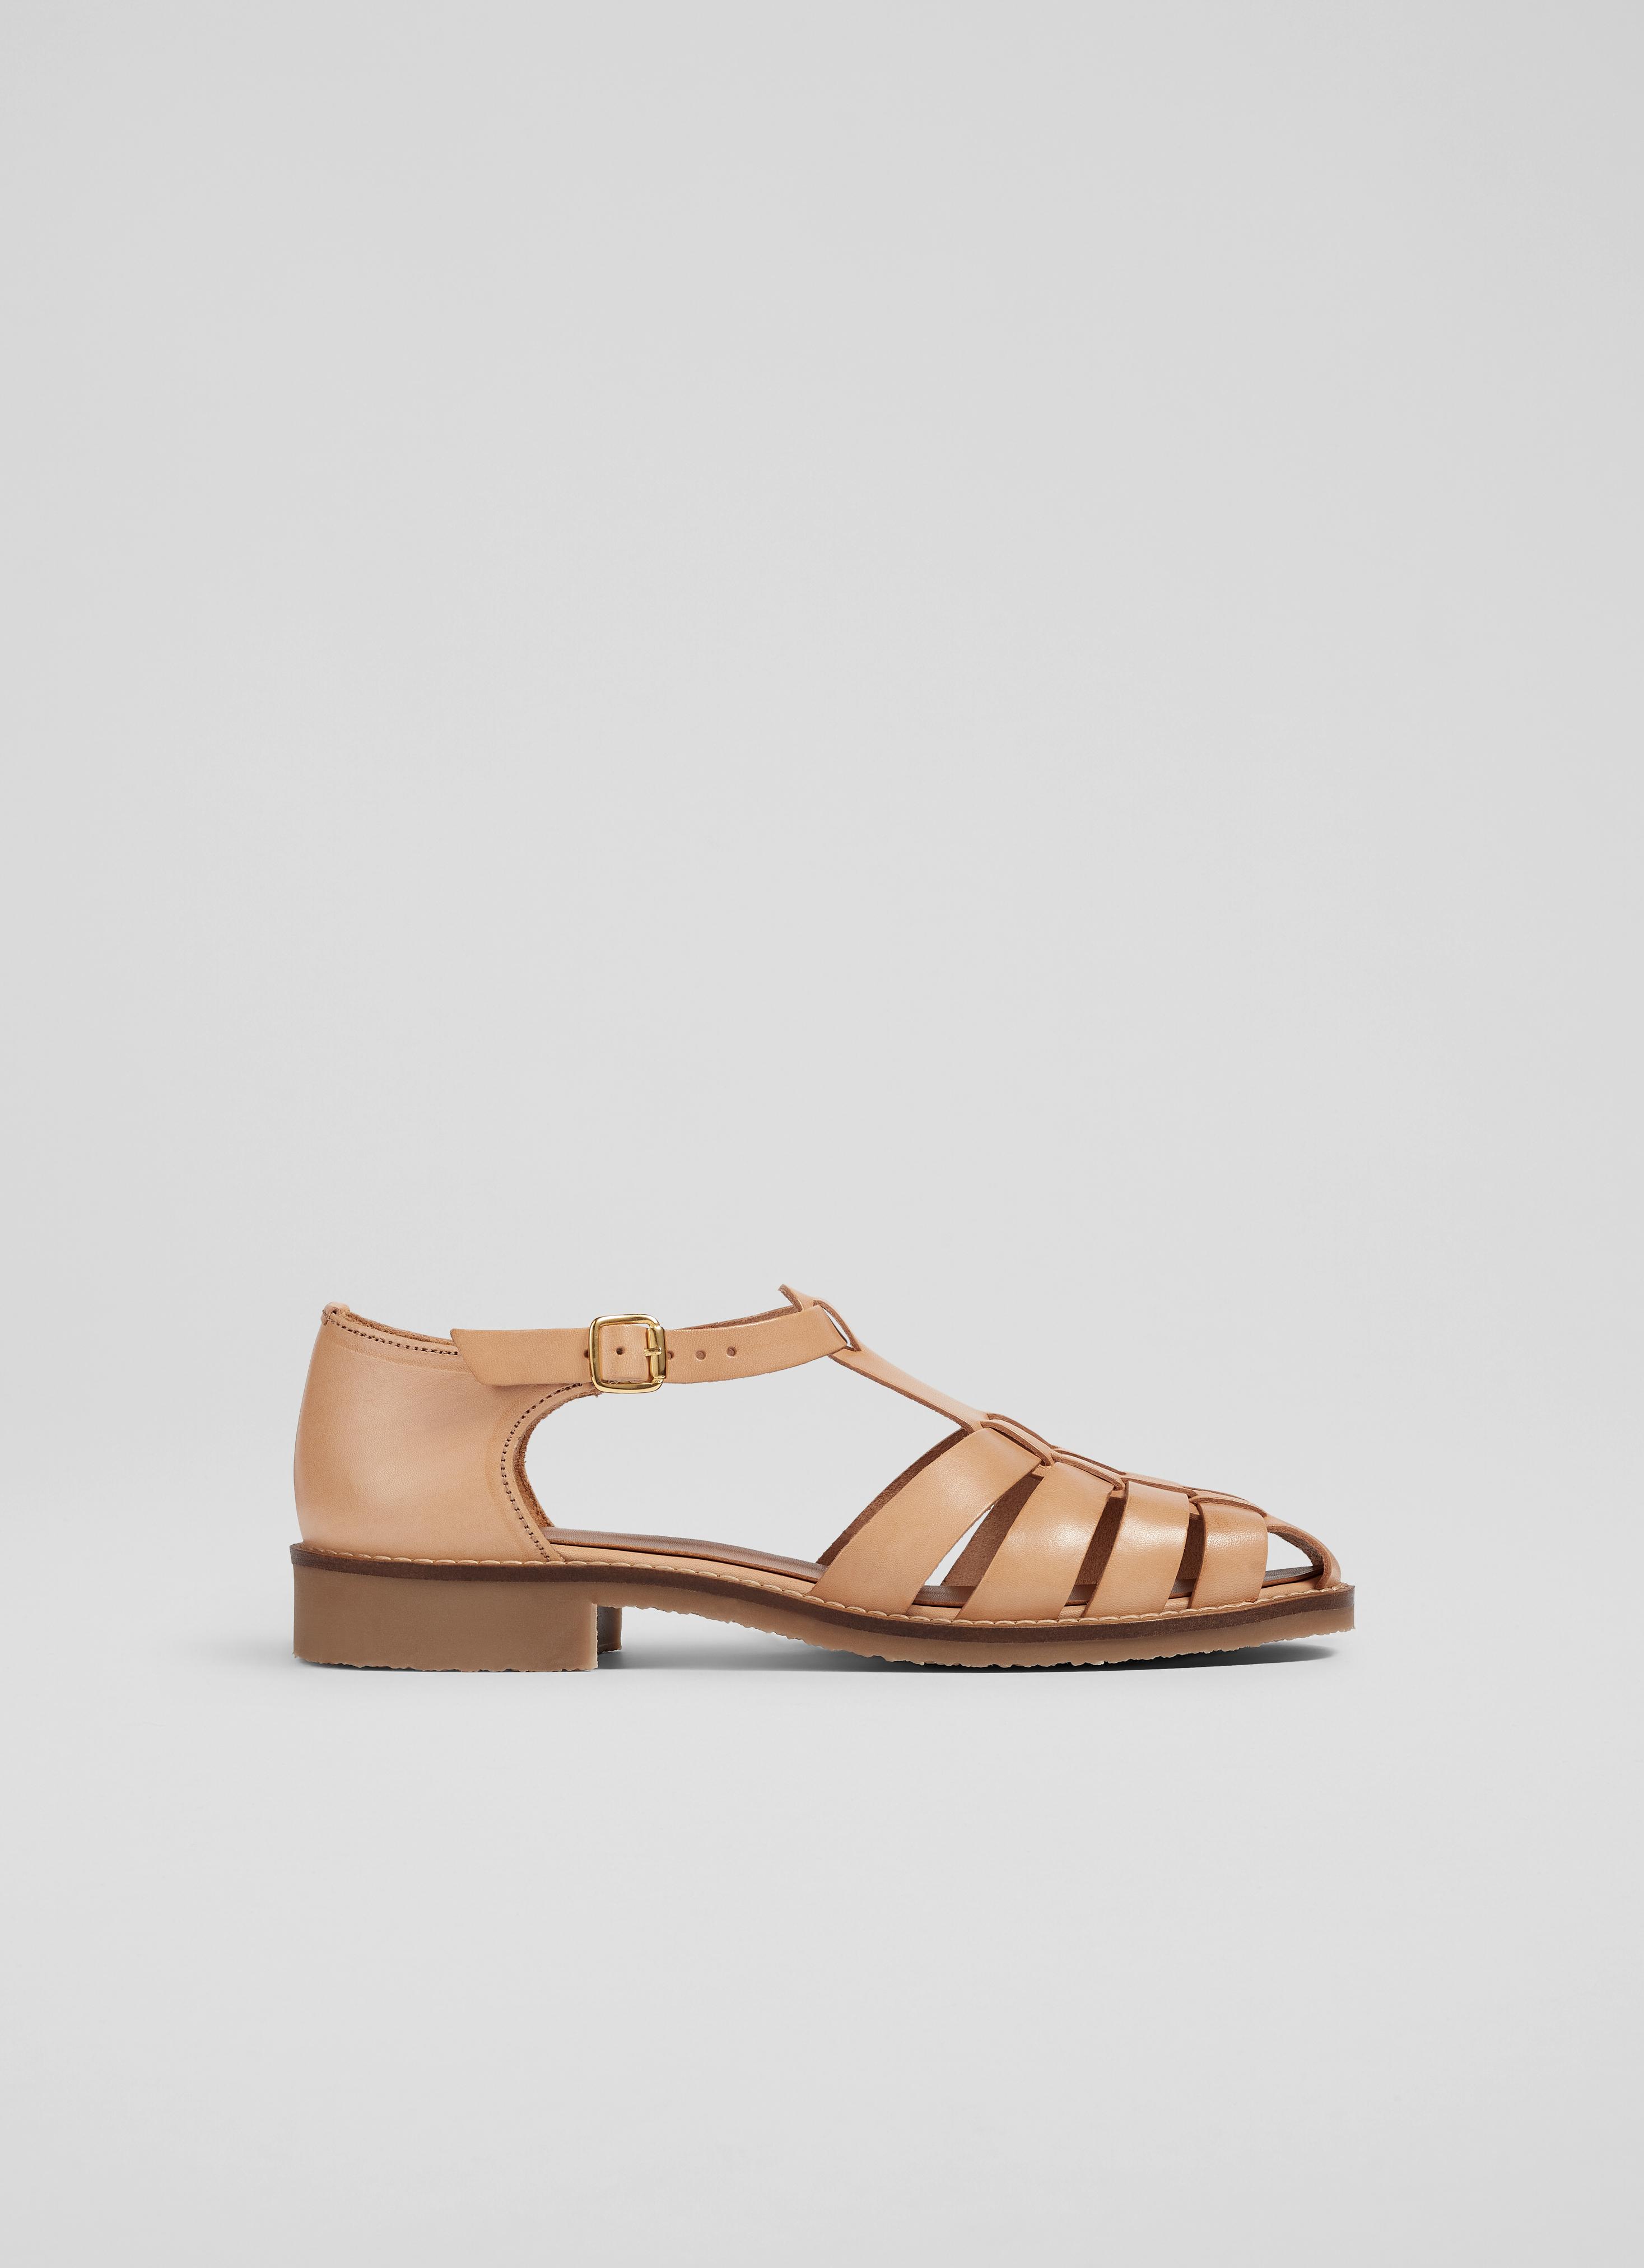 L.K.Bennett Lidia Tan Vegetable Dyed Leather Flat Sandals, Biscuit